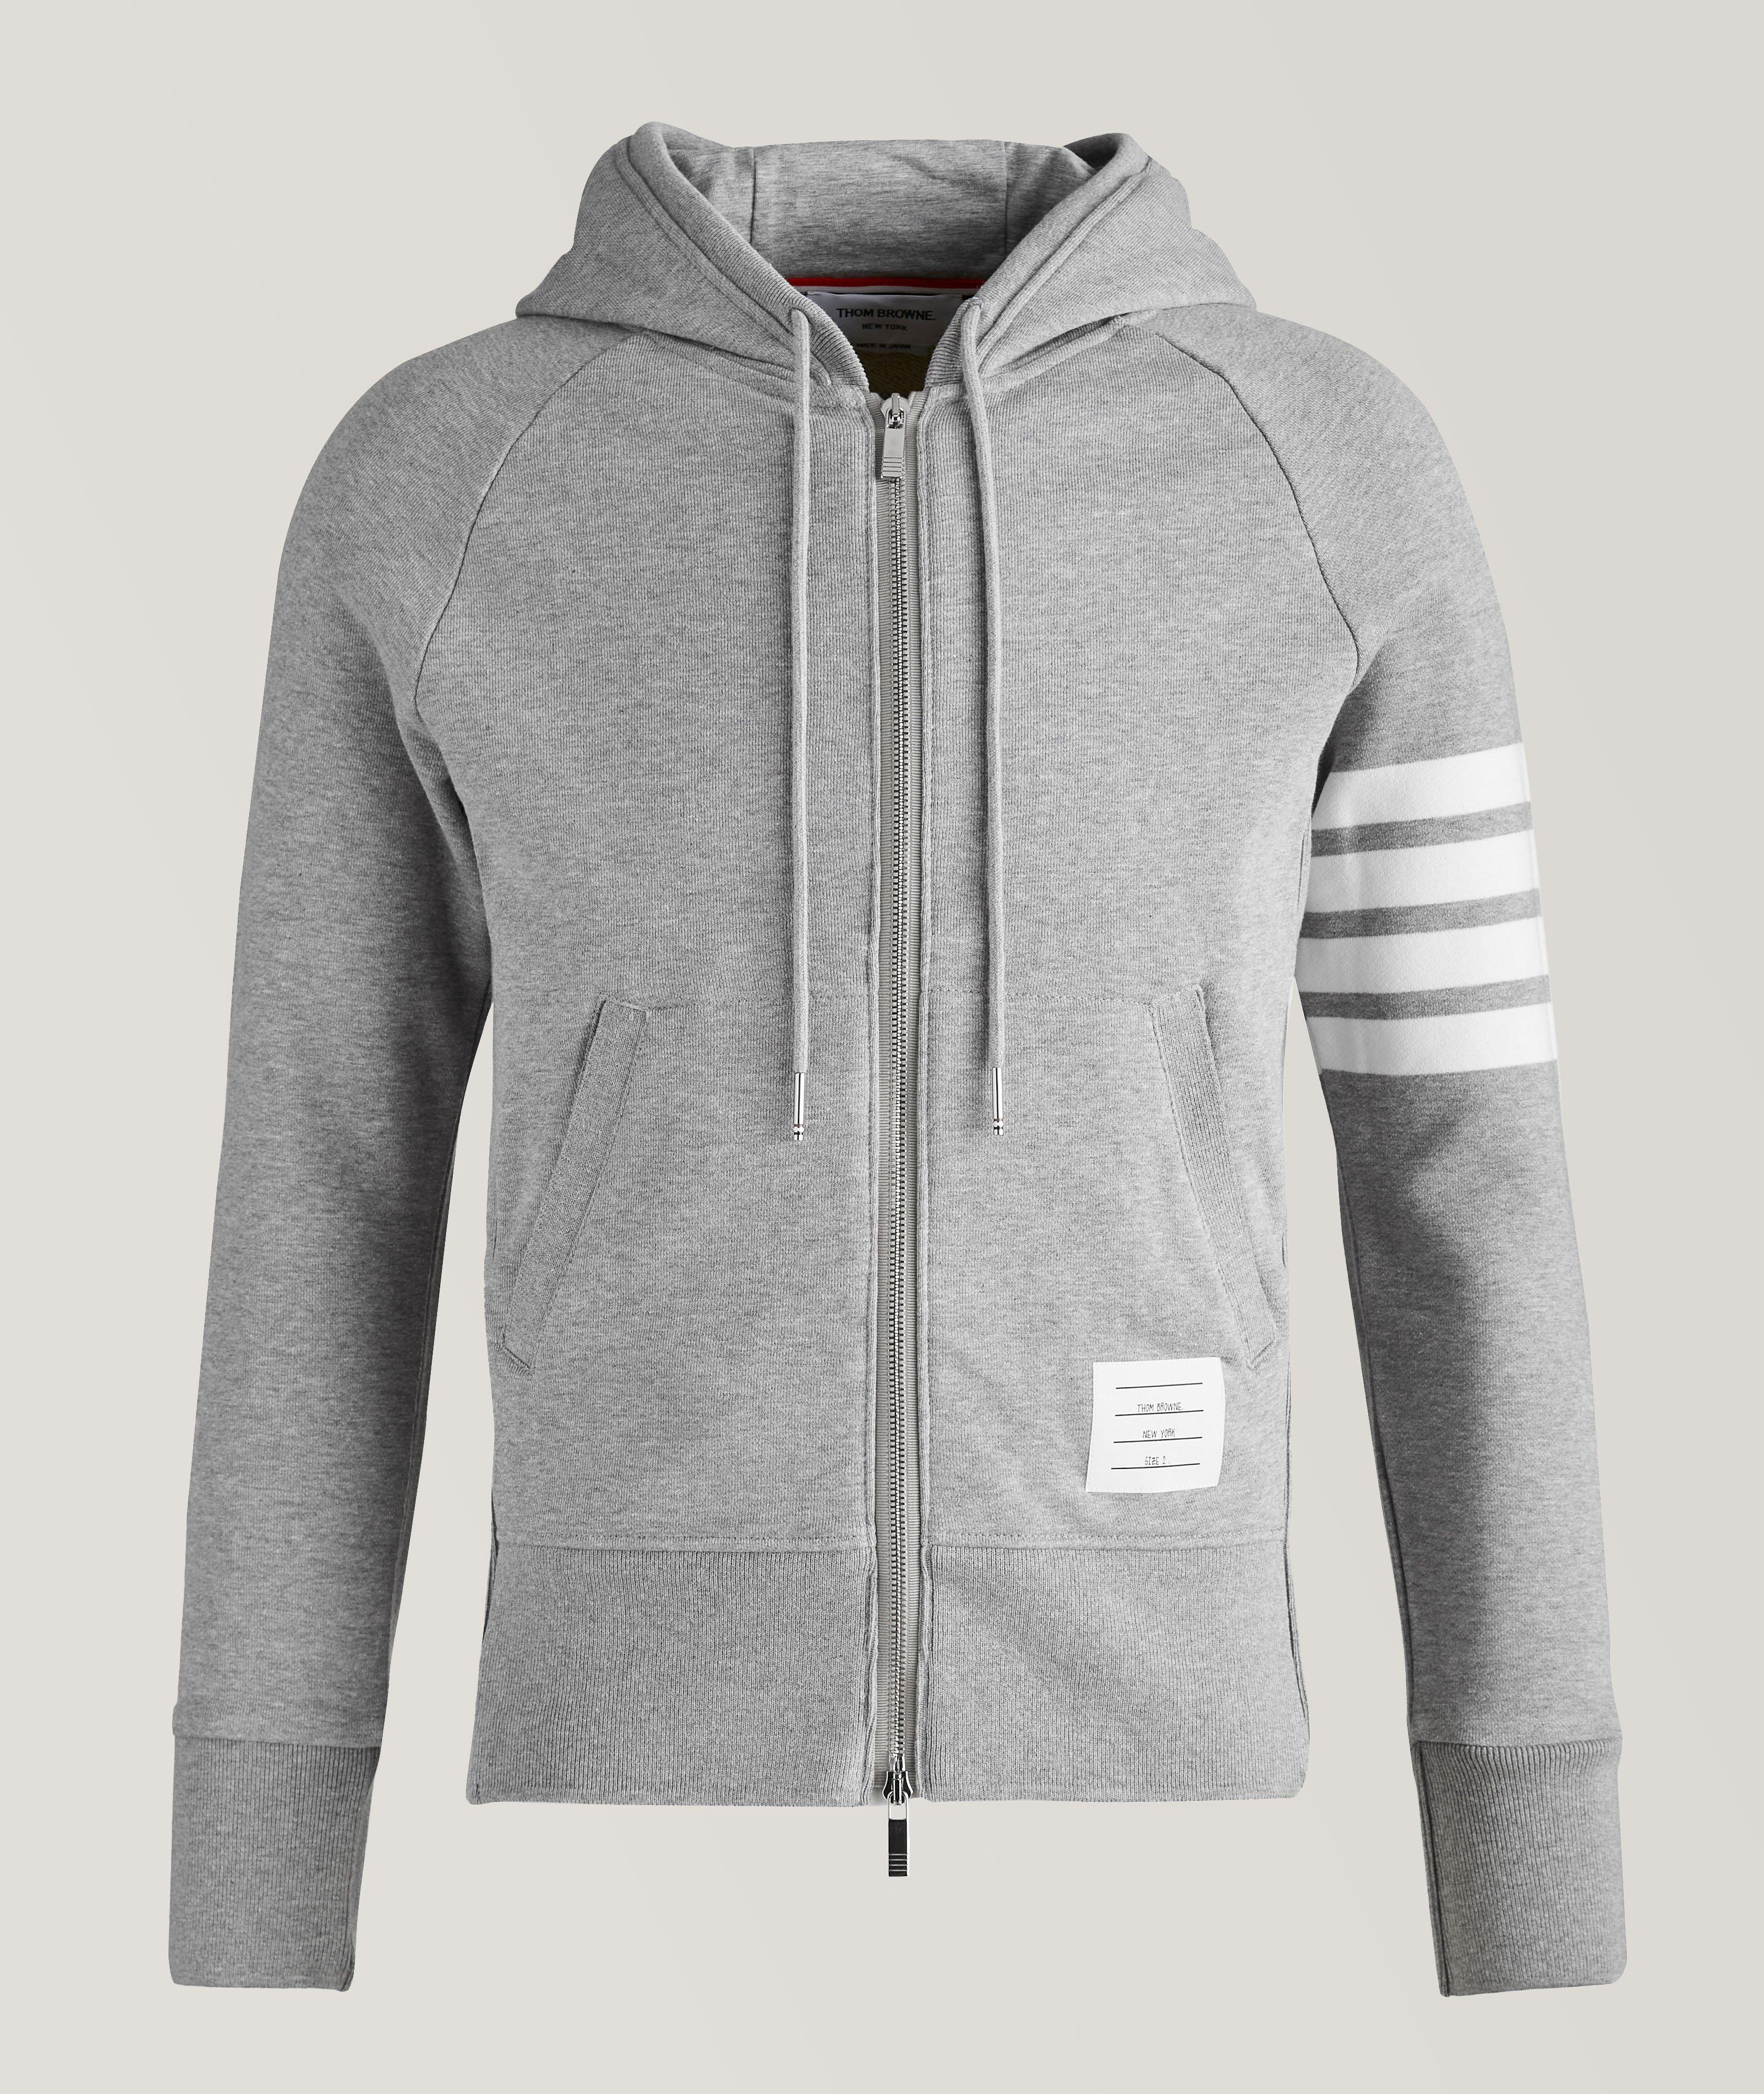 Four-Bar Stripe Zip-Up Cotton Hooded Sweater image 0